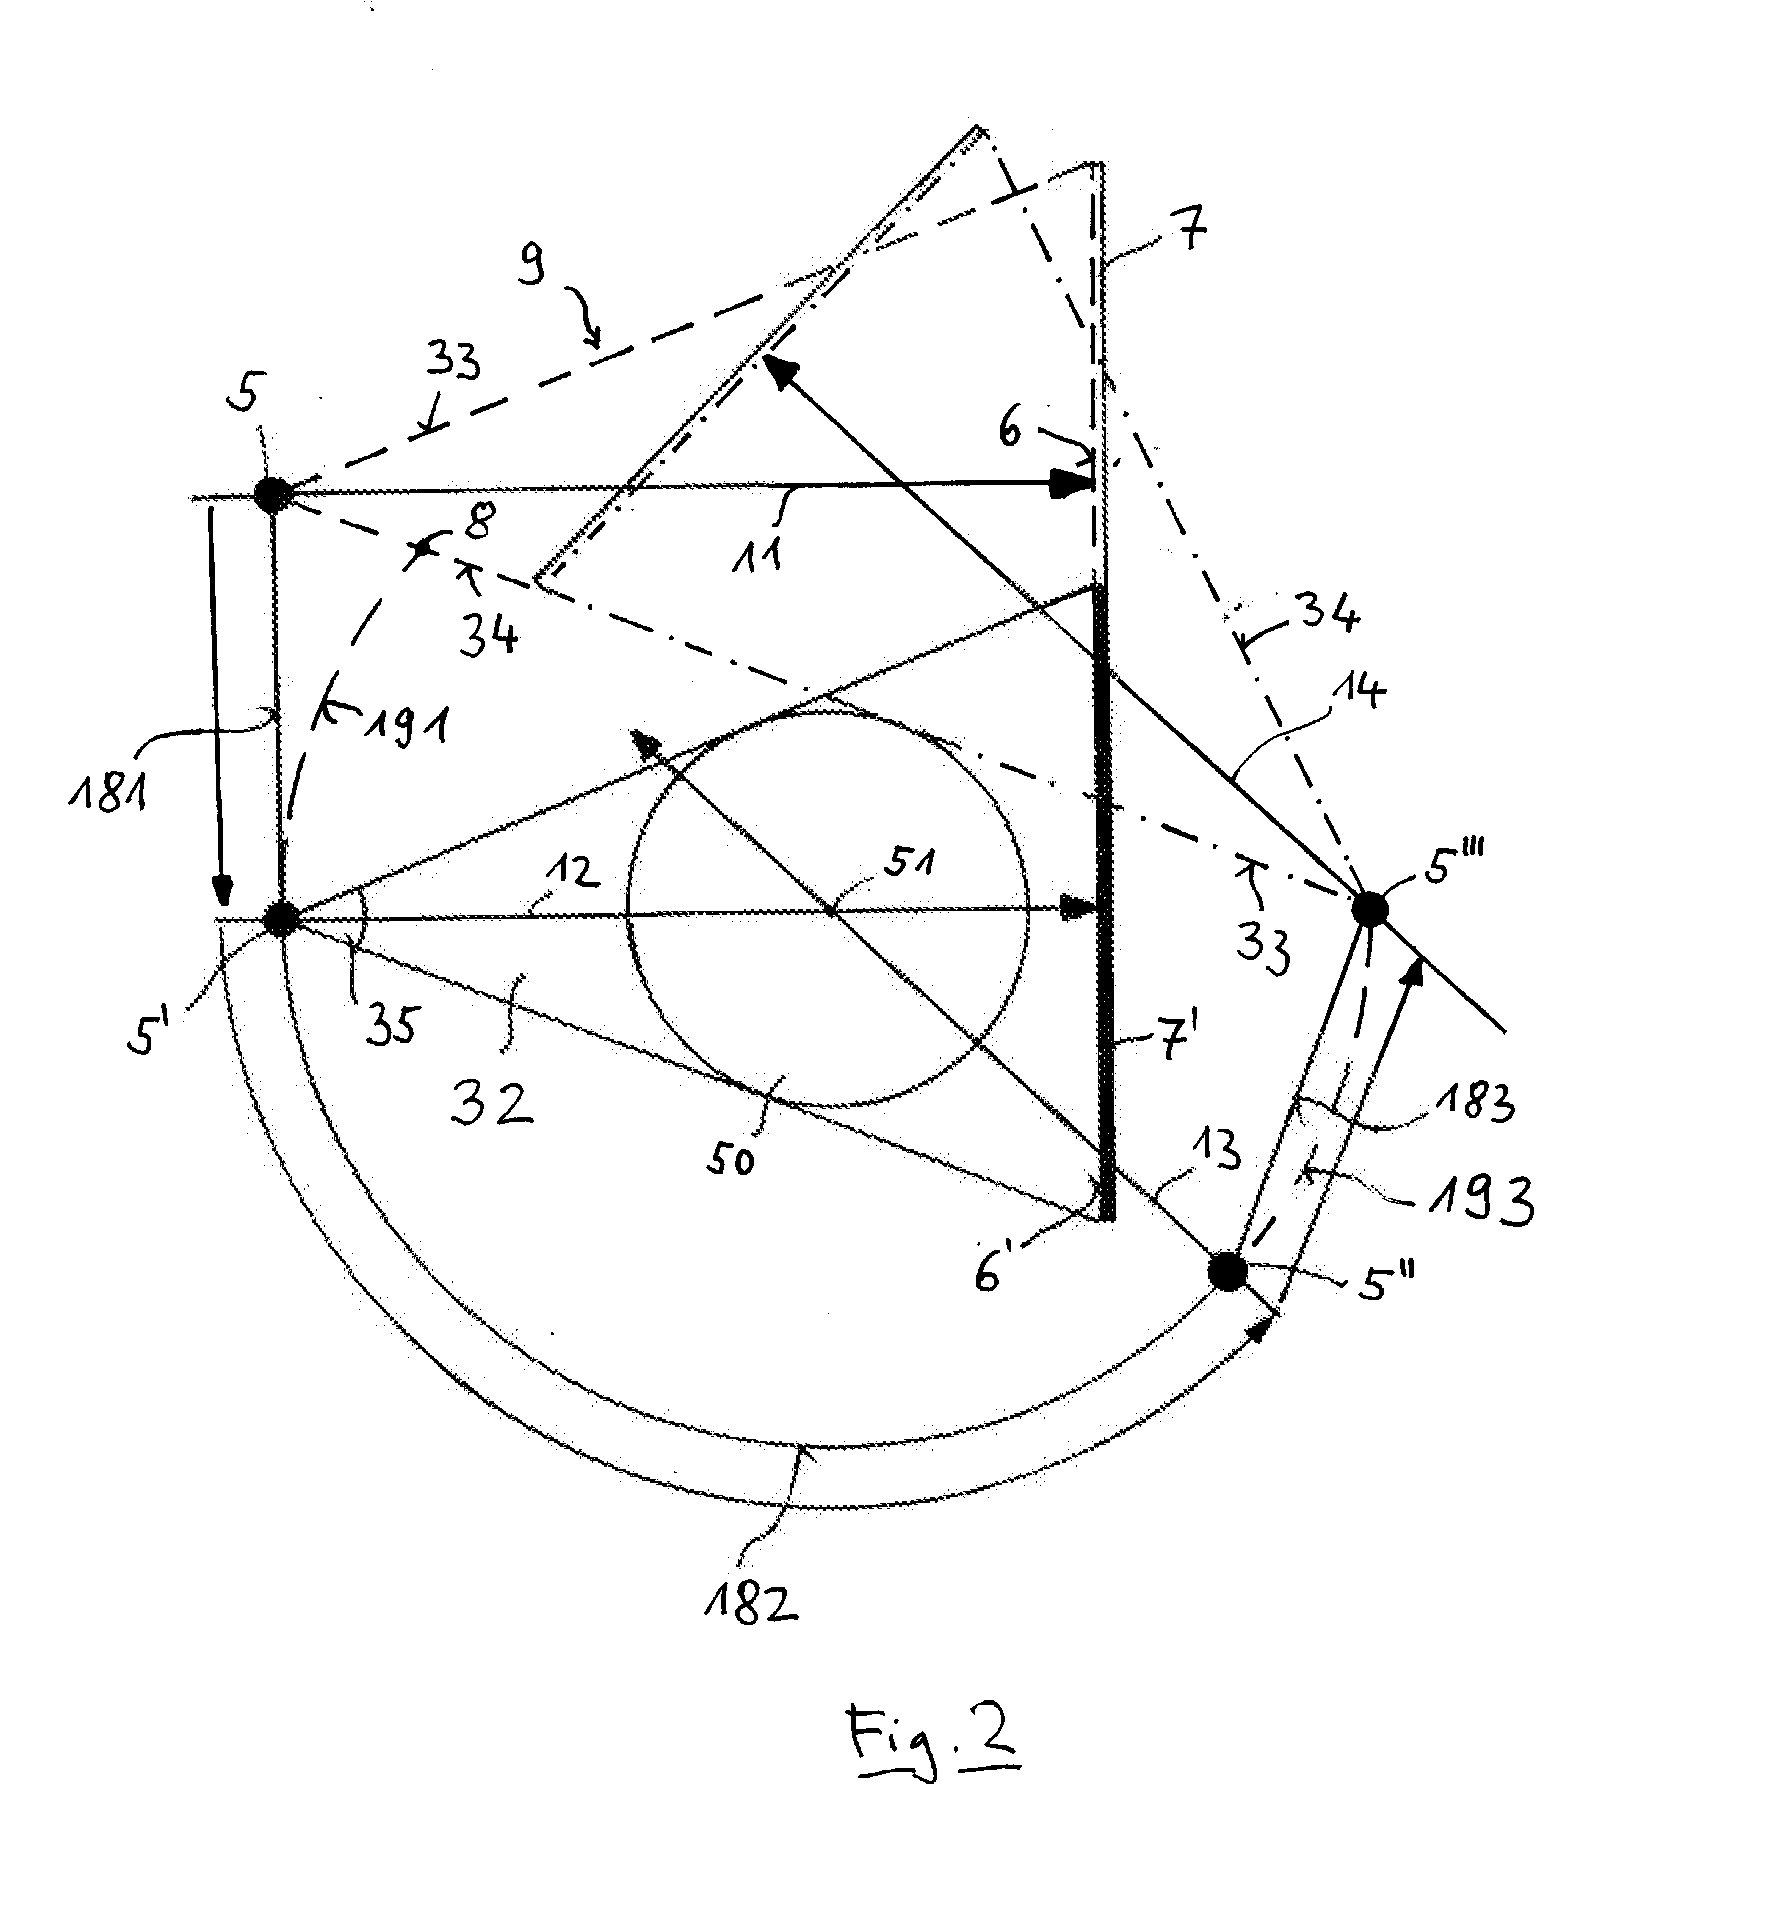 Method for recording a complete projection data set in the central layer for ct reconstruction using a c-arm x-ray apparatus with a limited rotation range